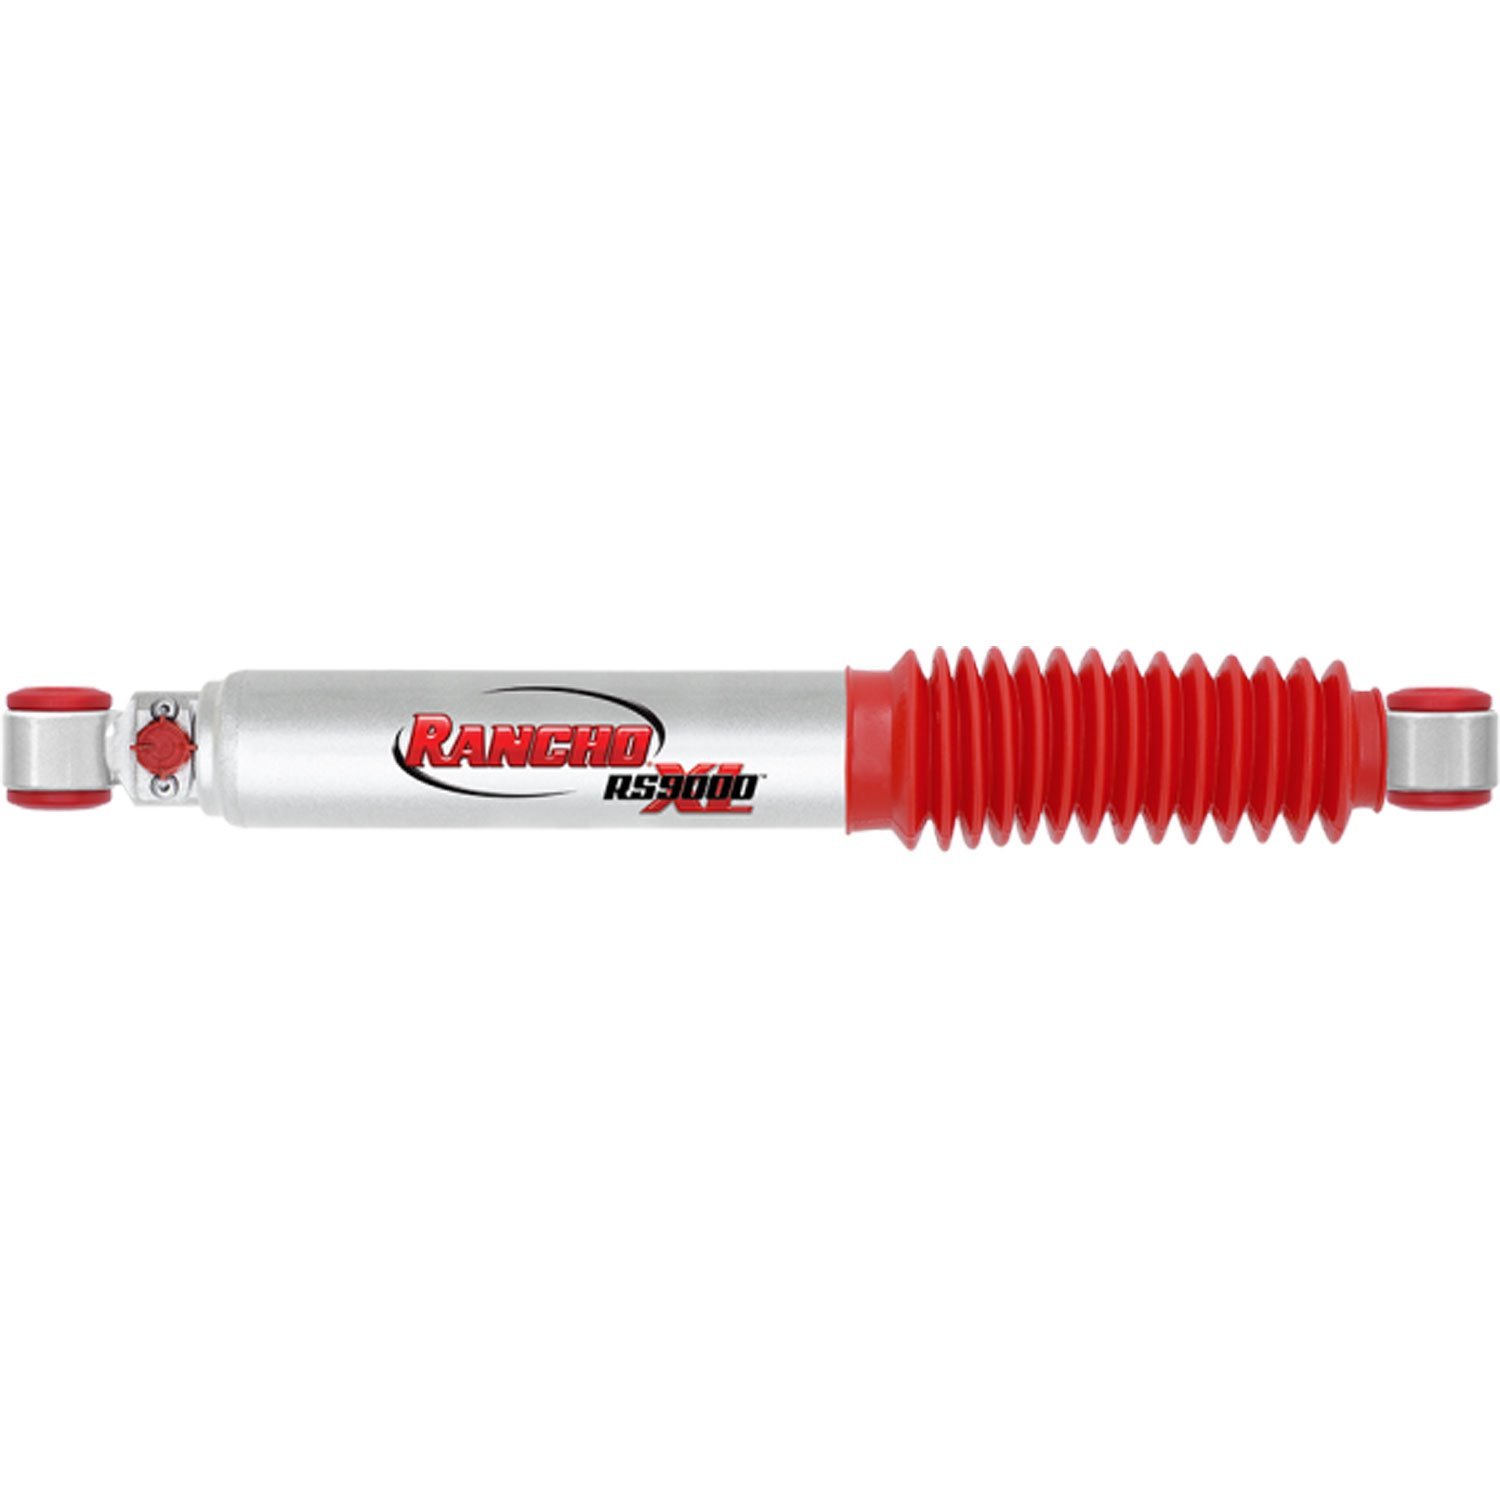 RS9000XL Rear Shock Absorber Fits for Nissan Frontier and Pathfinder